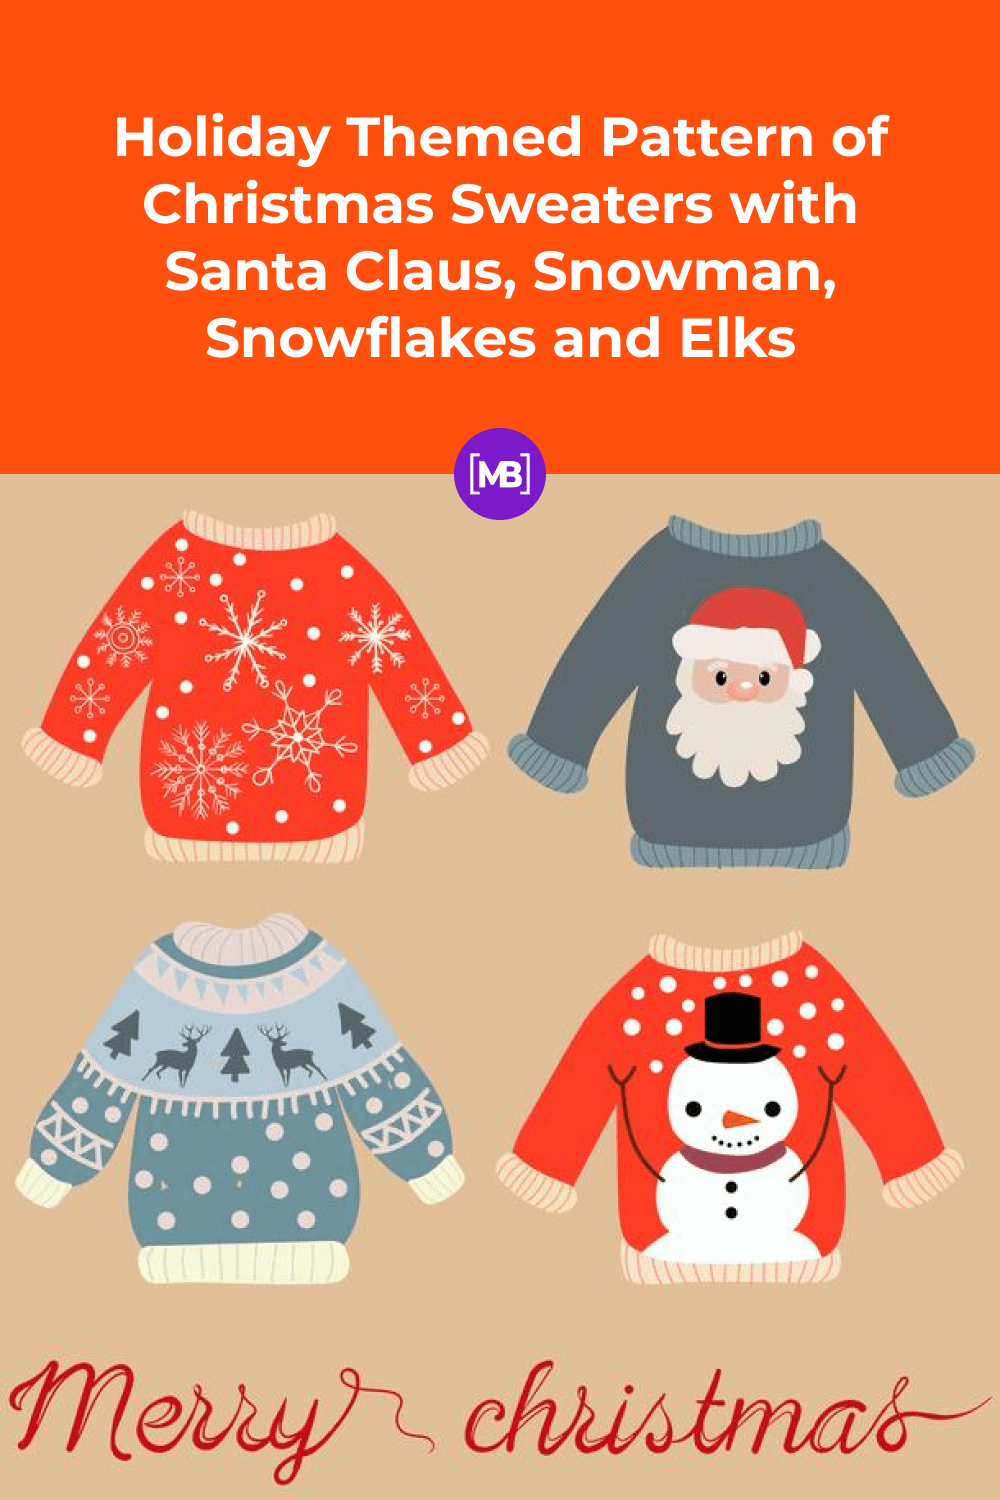 Holiday Themed Pattern of Christmas Sweaters with Santa Claus, Snowman, Snowflakes and Elks.